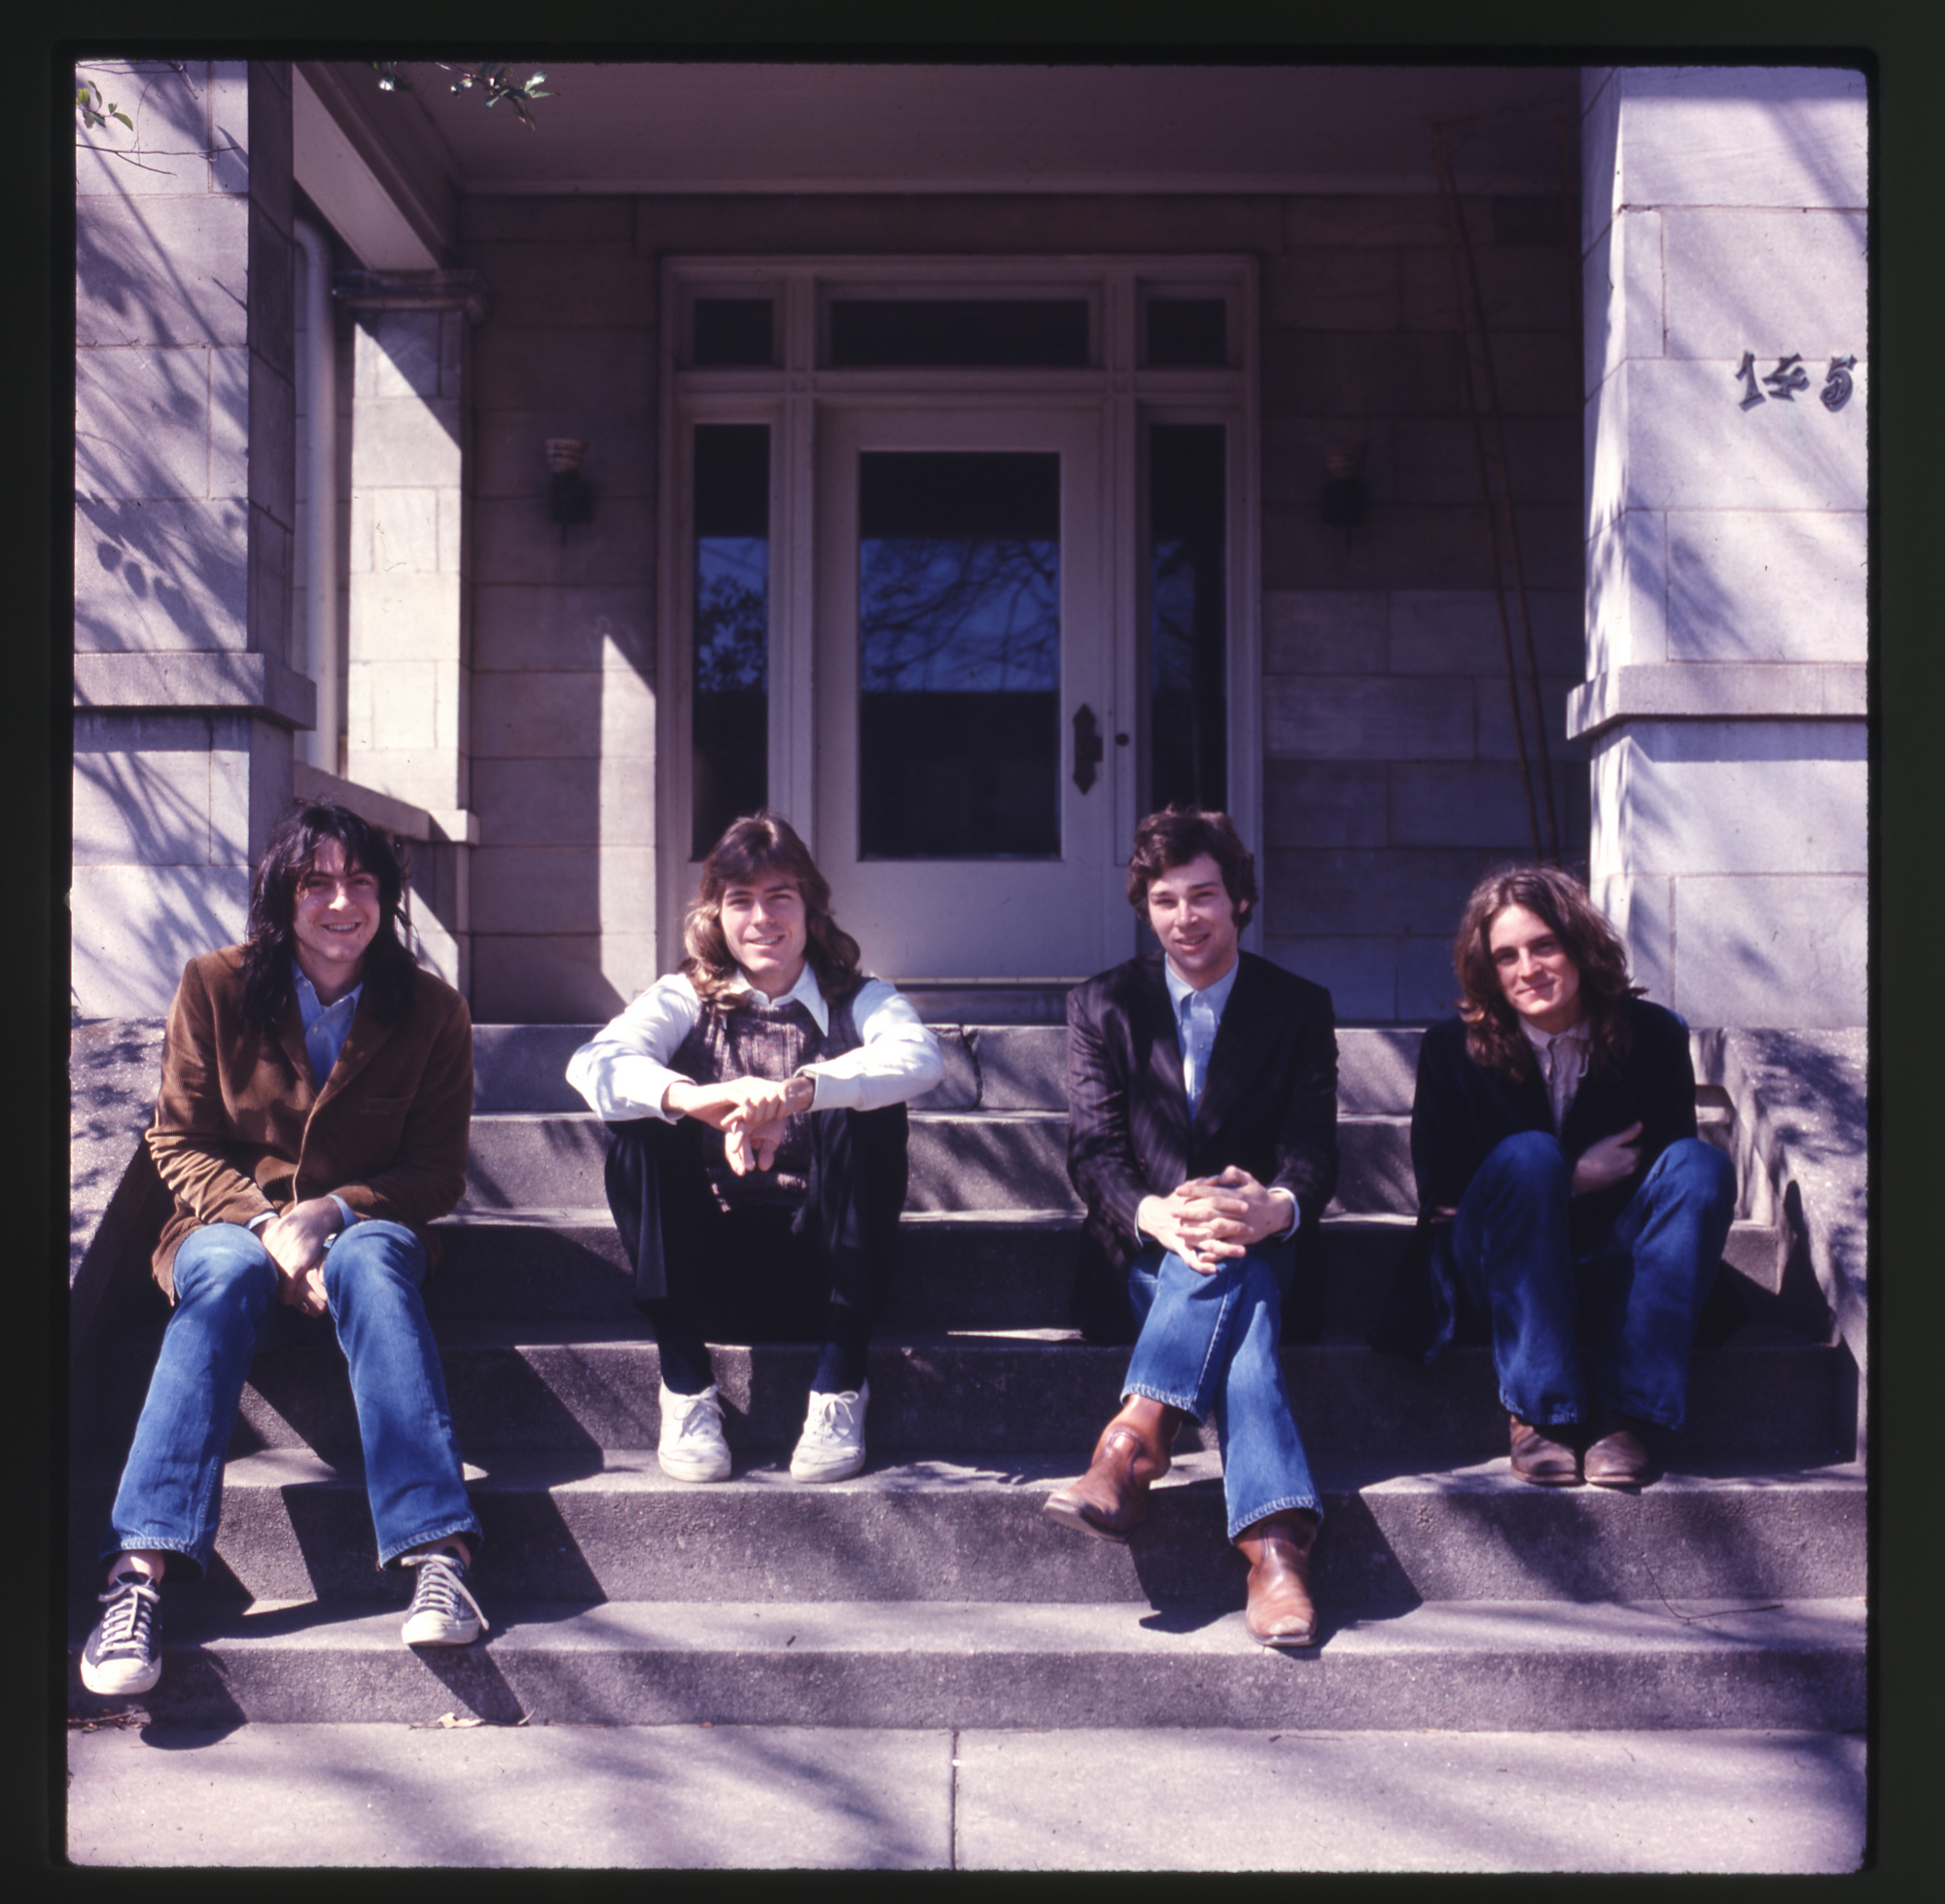 Still of Chris Bell, Alex Chilton and Jody Stephens in Big Star: Nothing Can Hurt Me (2012)